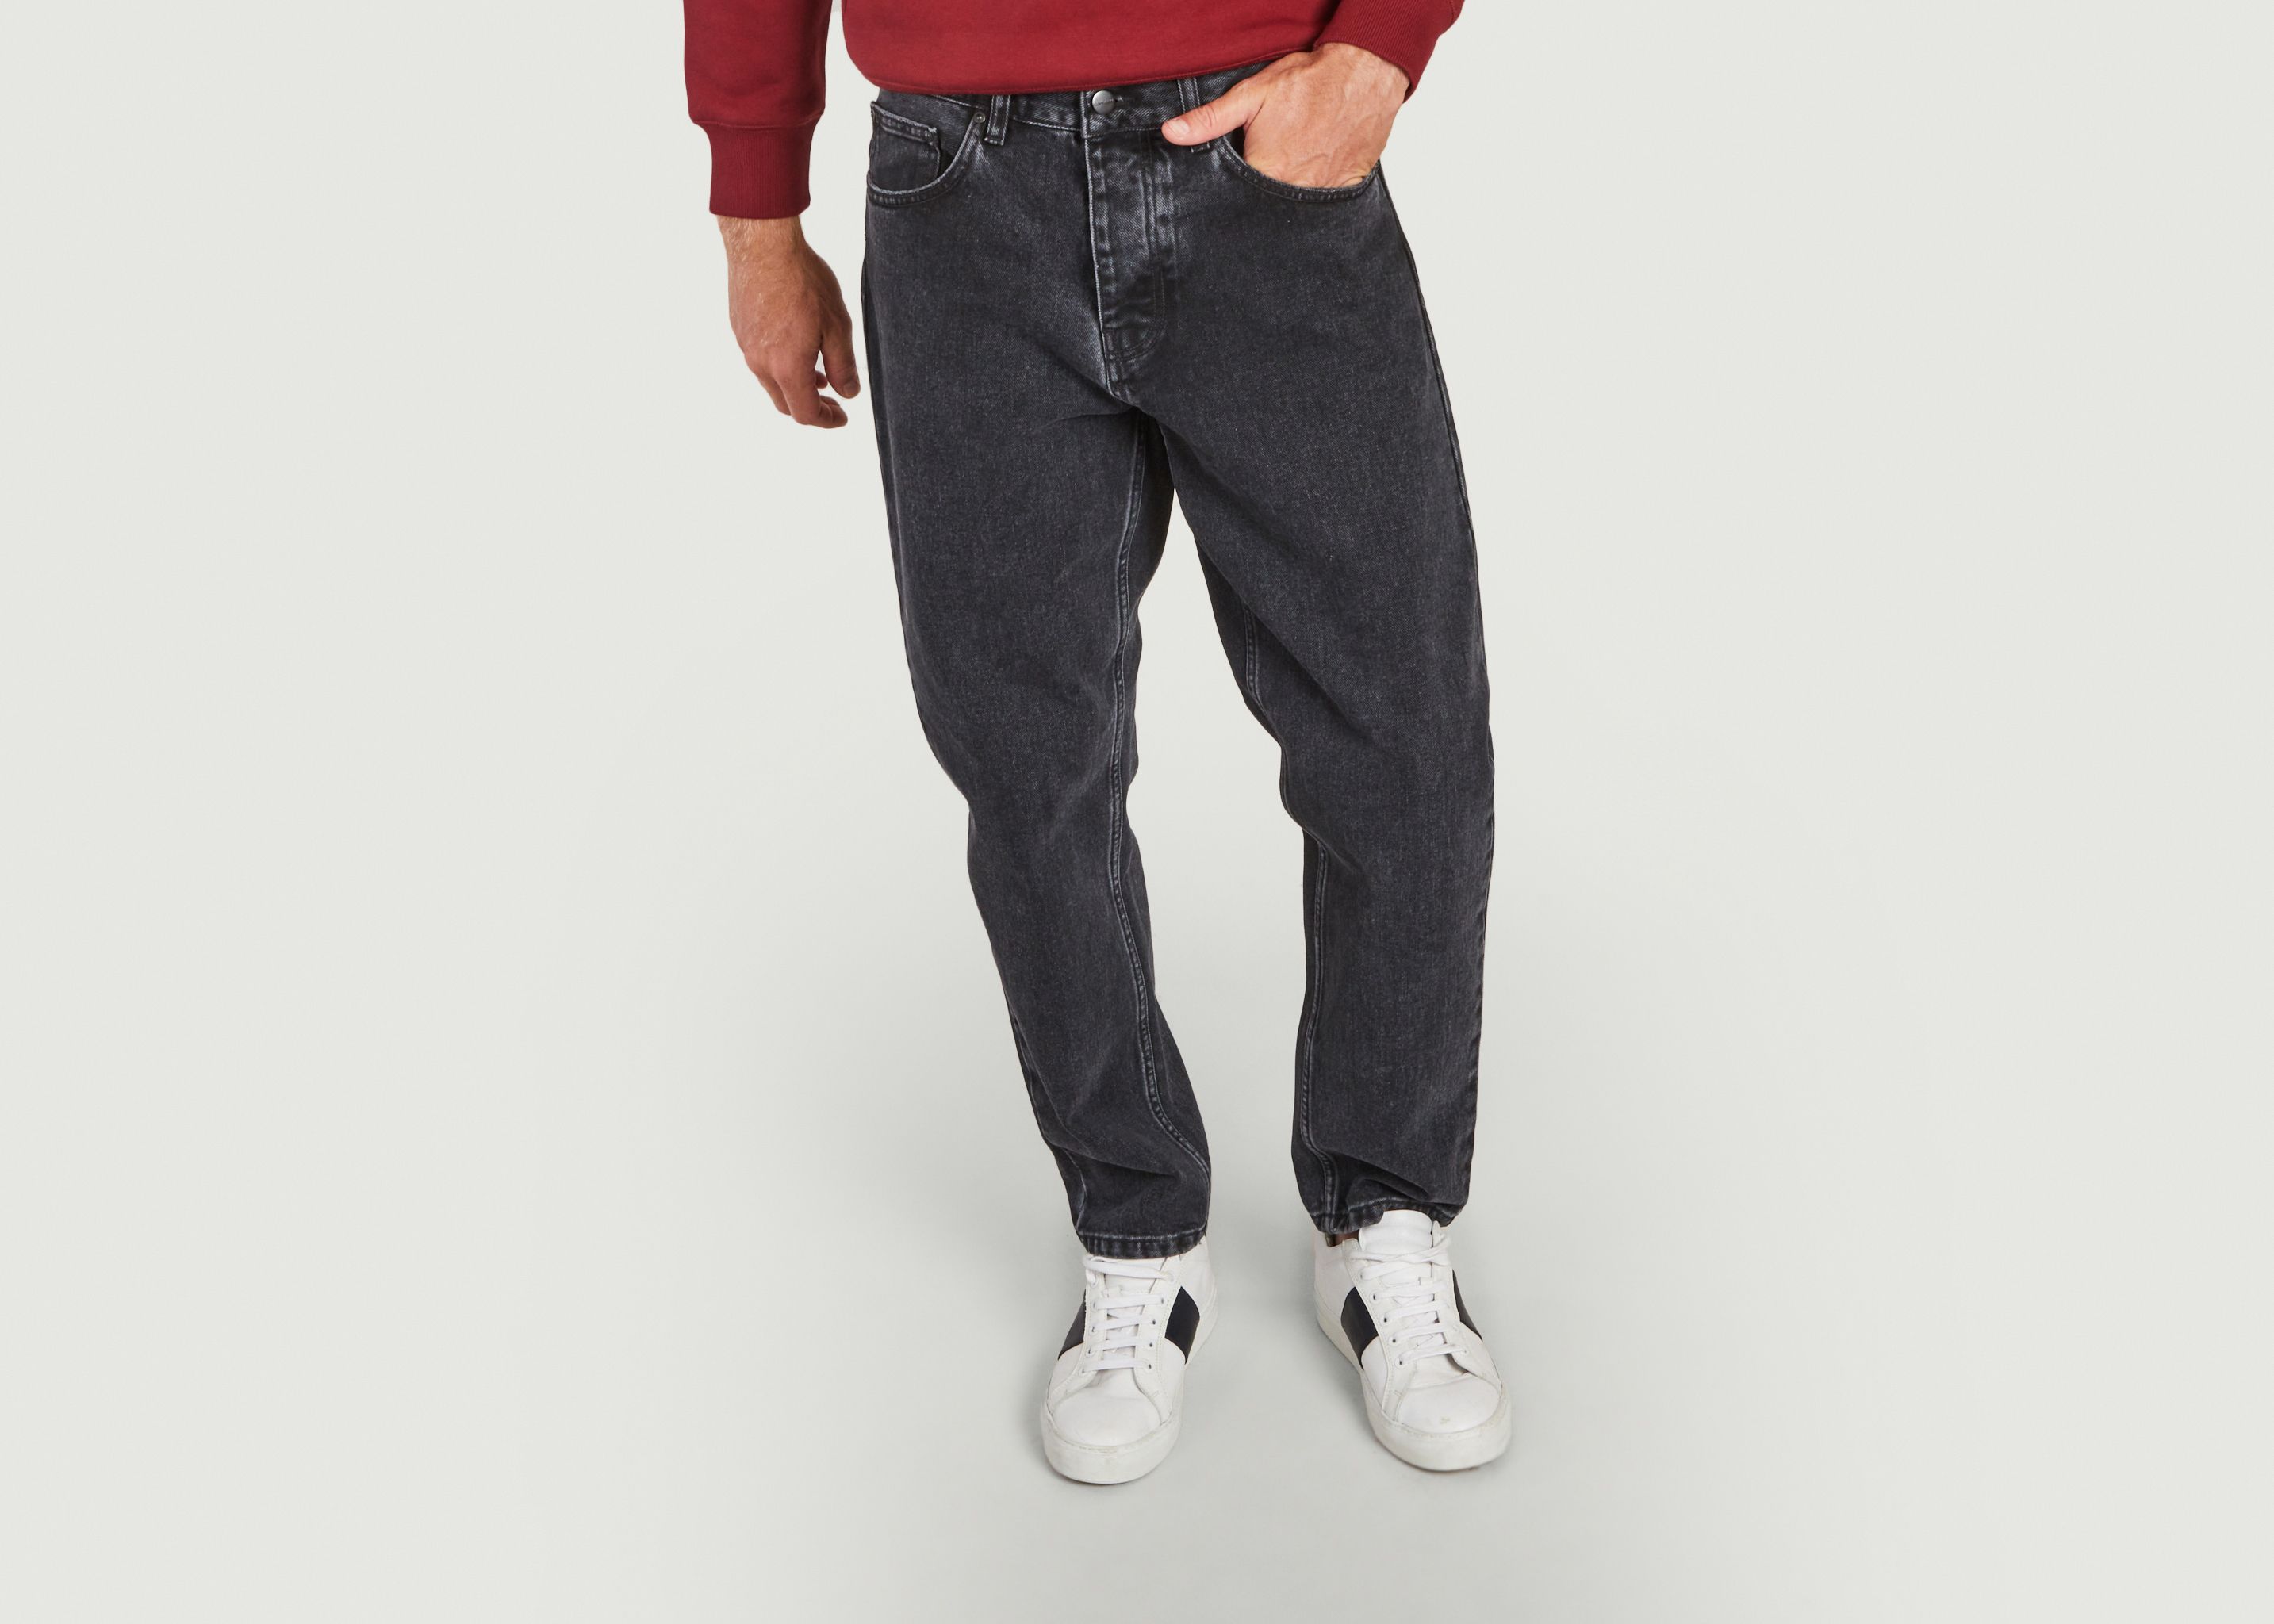 Newel organic cotton casual dyed jeans - Carhartt WIP